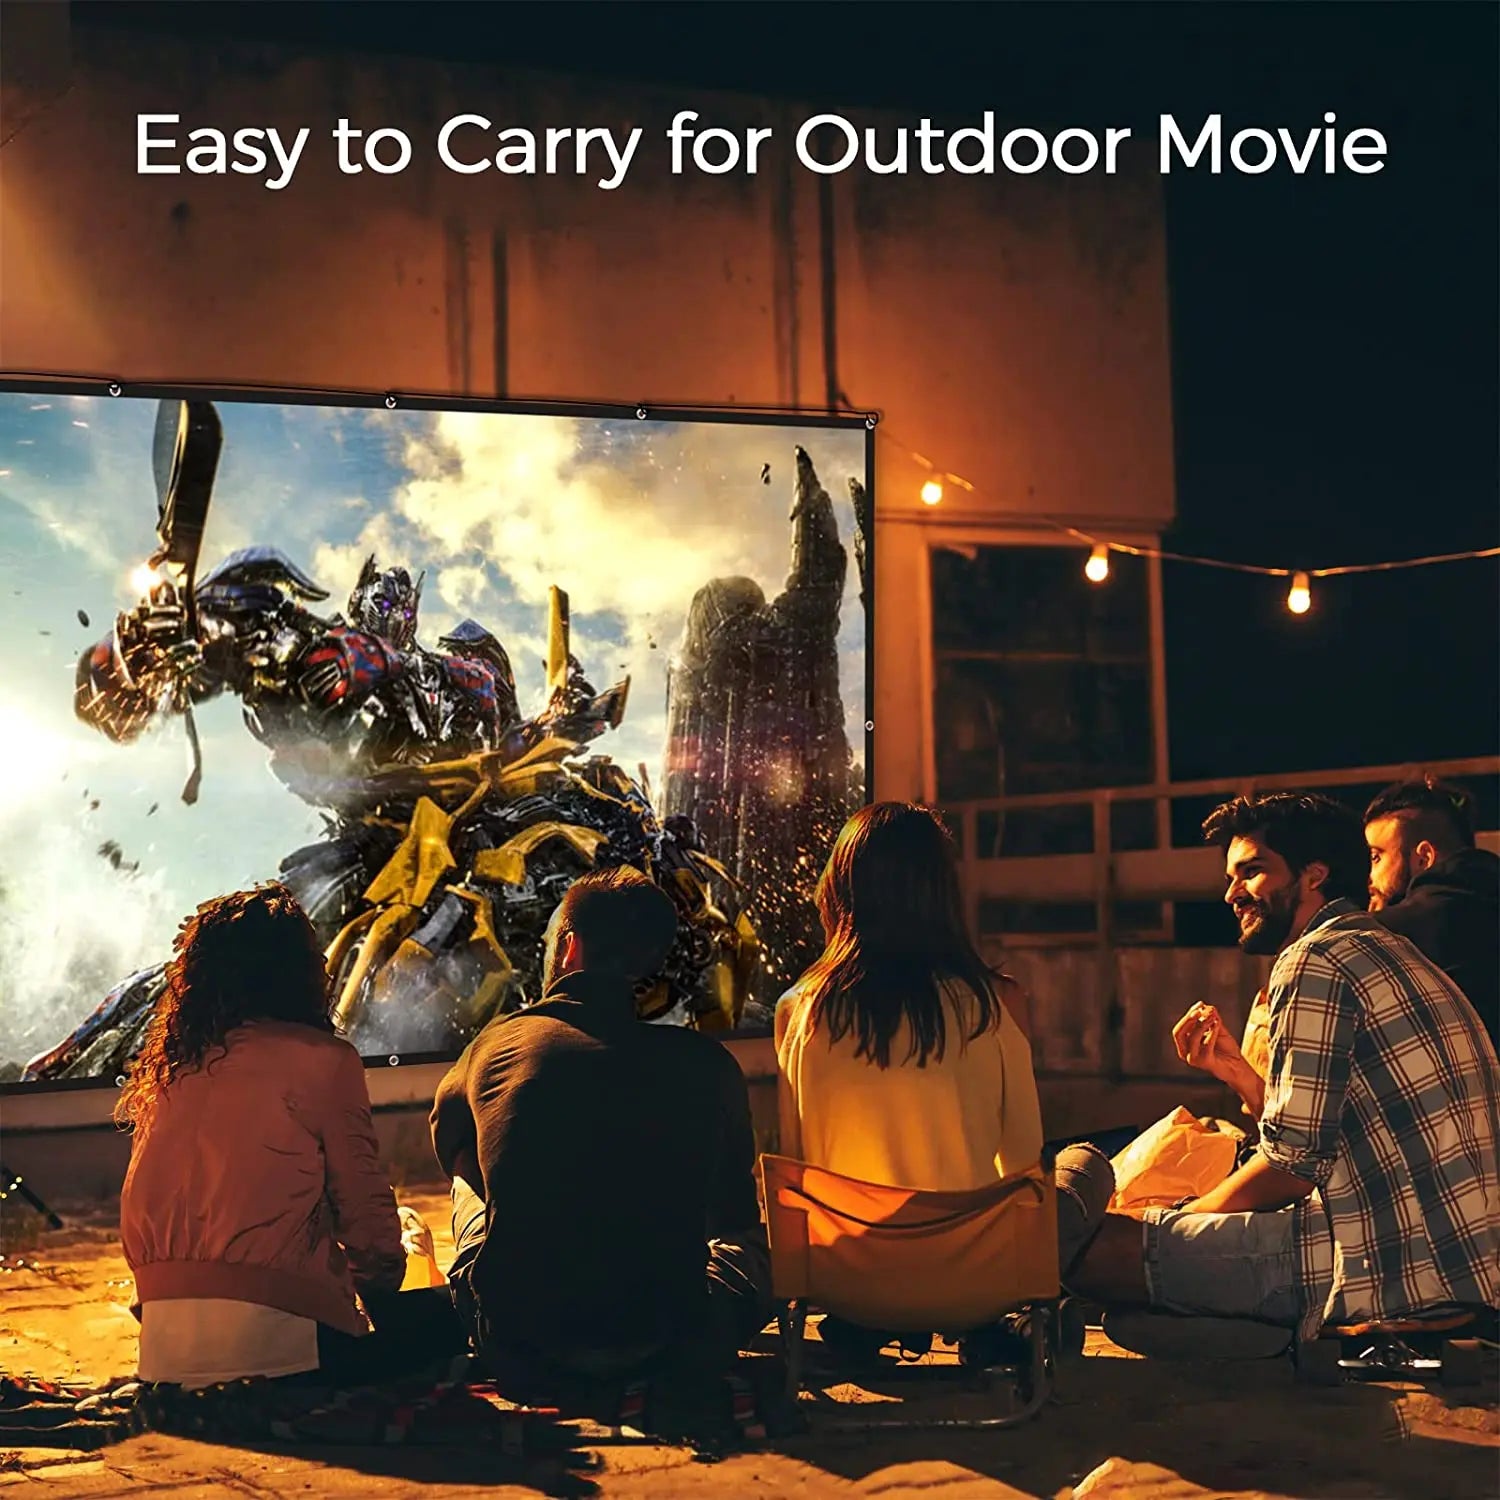 New Year Sale - Projector Screen 120 inch, FUDONI Outdoor Movie Screen 16:9 Foldable Washable Anti-Crease, Portable Projector Screen Outdoor Indoor Double Sided Projection Screen for Home Theater Camping Party Office FUDONI